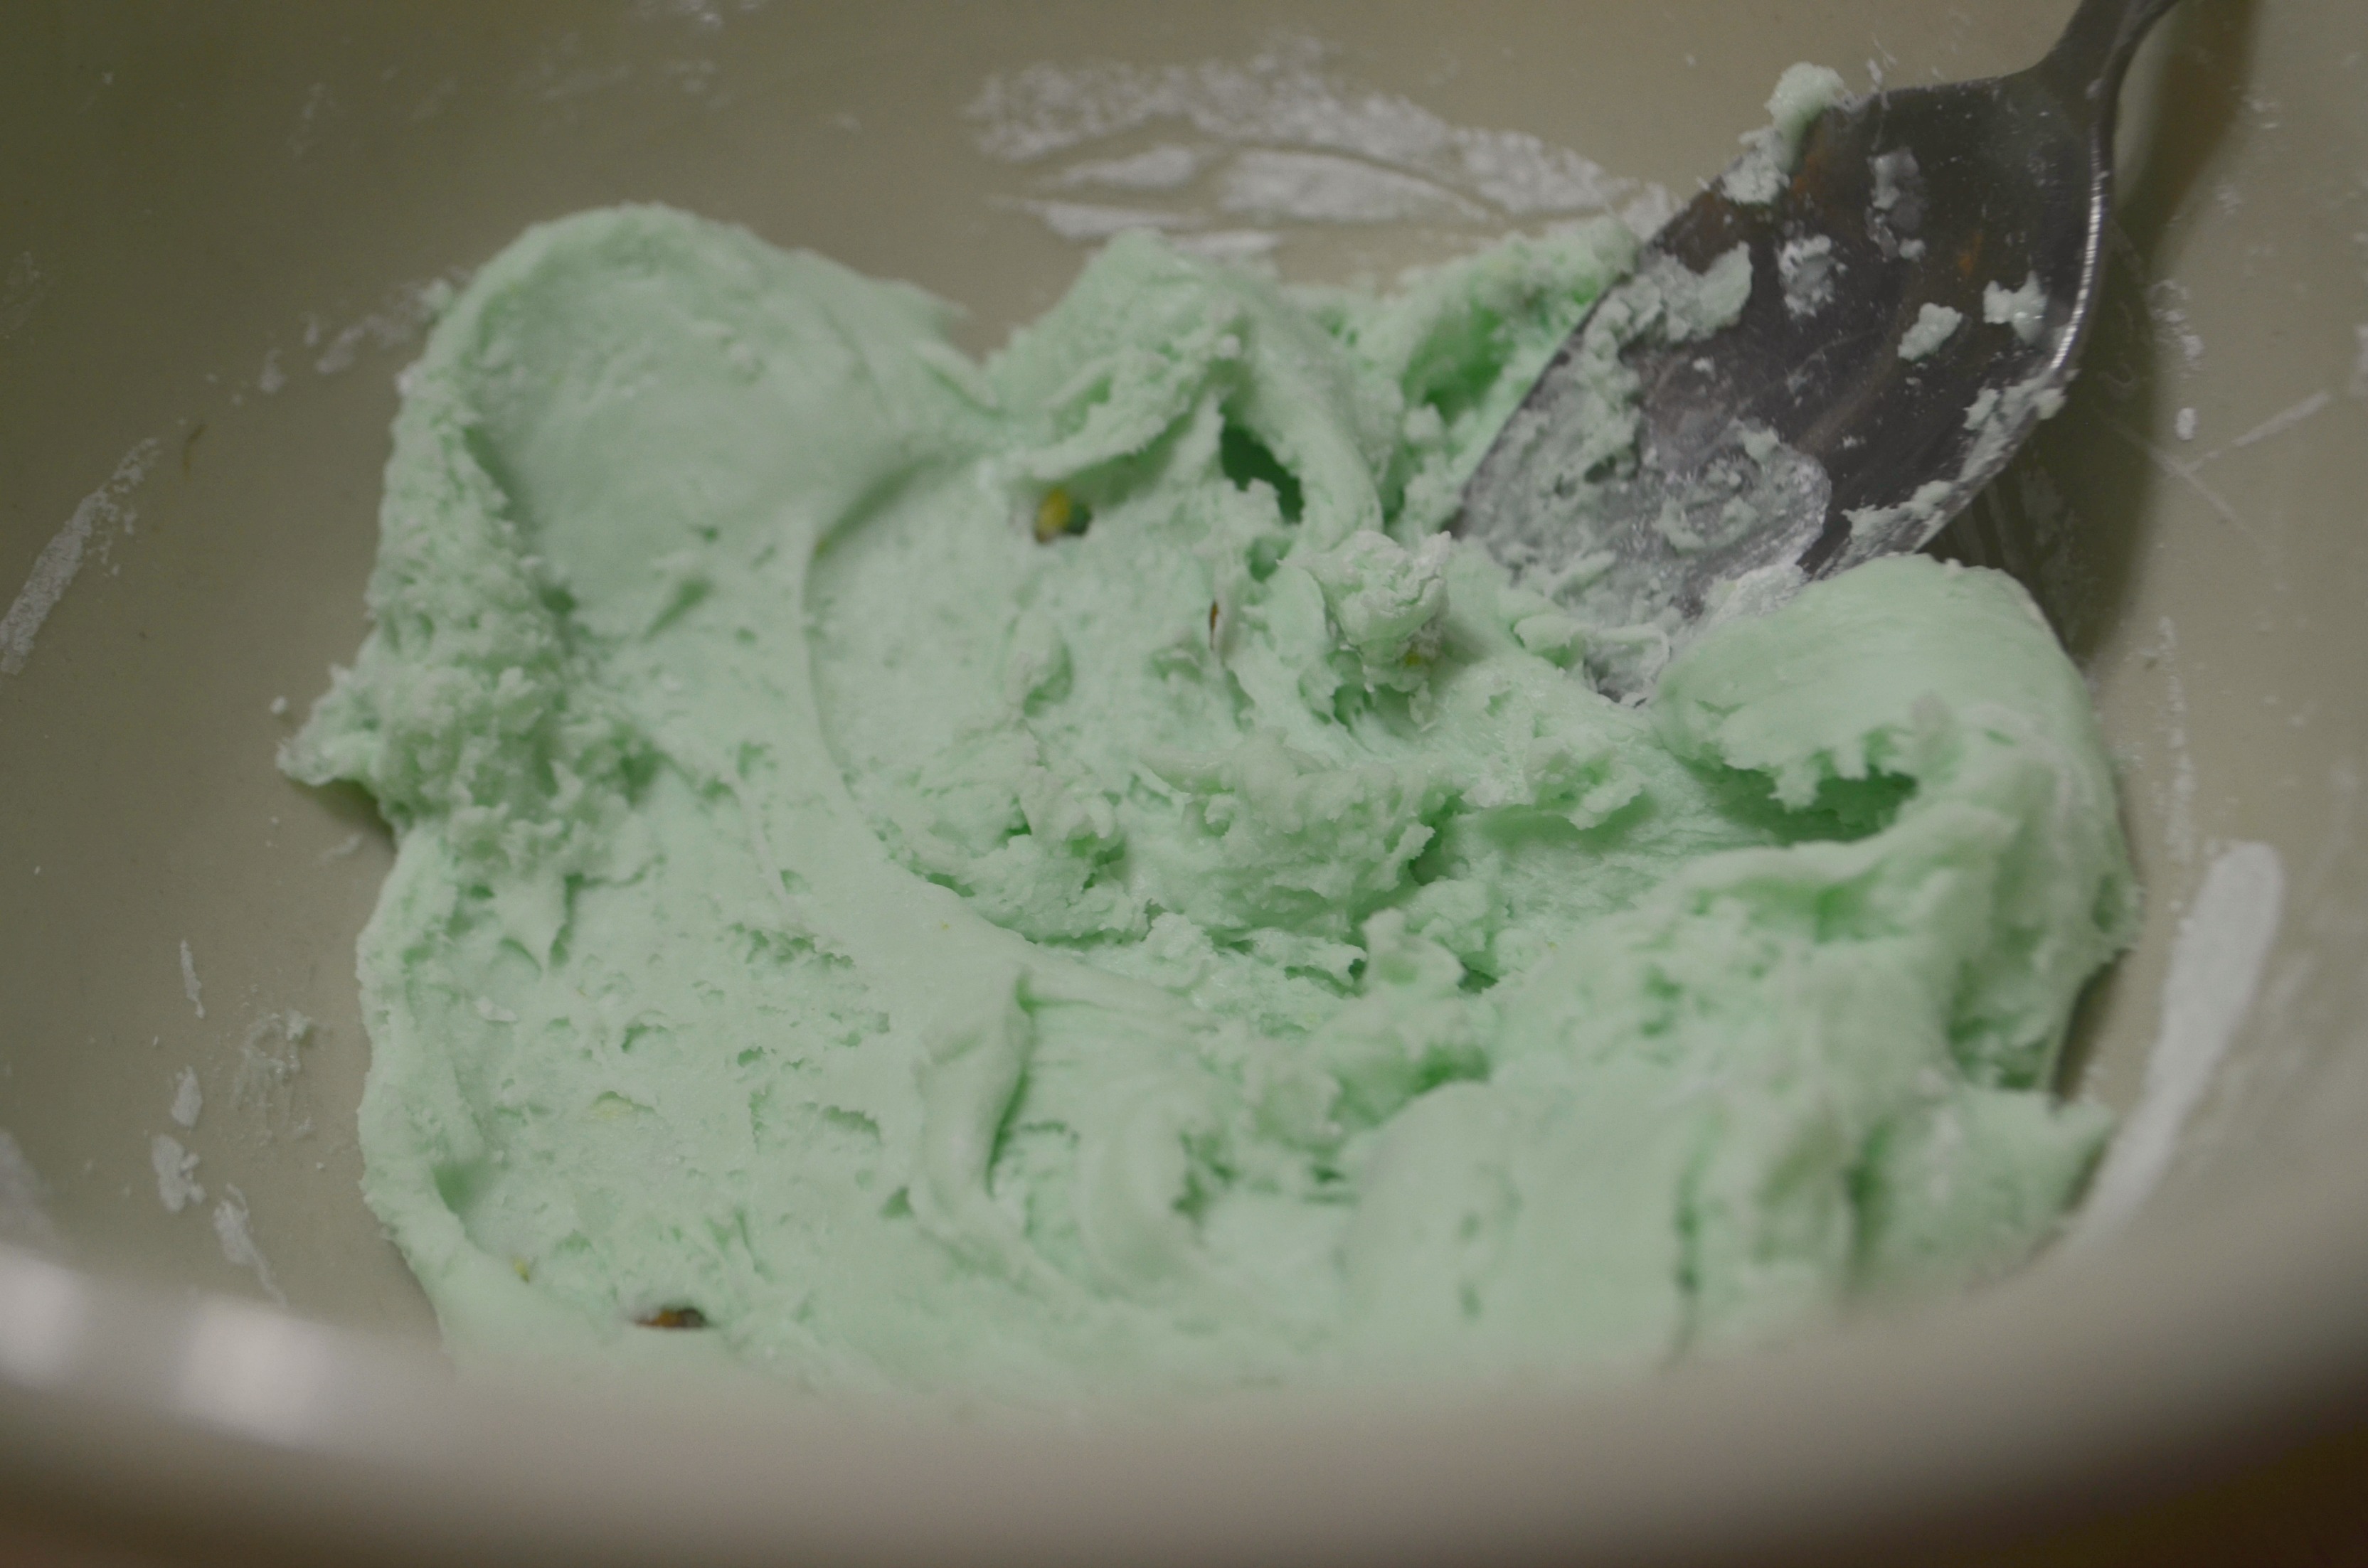 DIY play dough Pudding Slime – mixing the slime ingredients